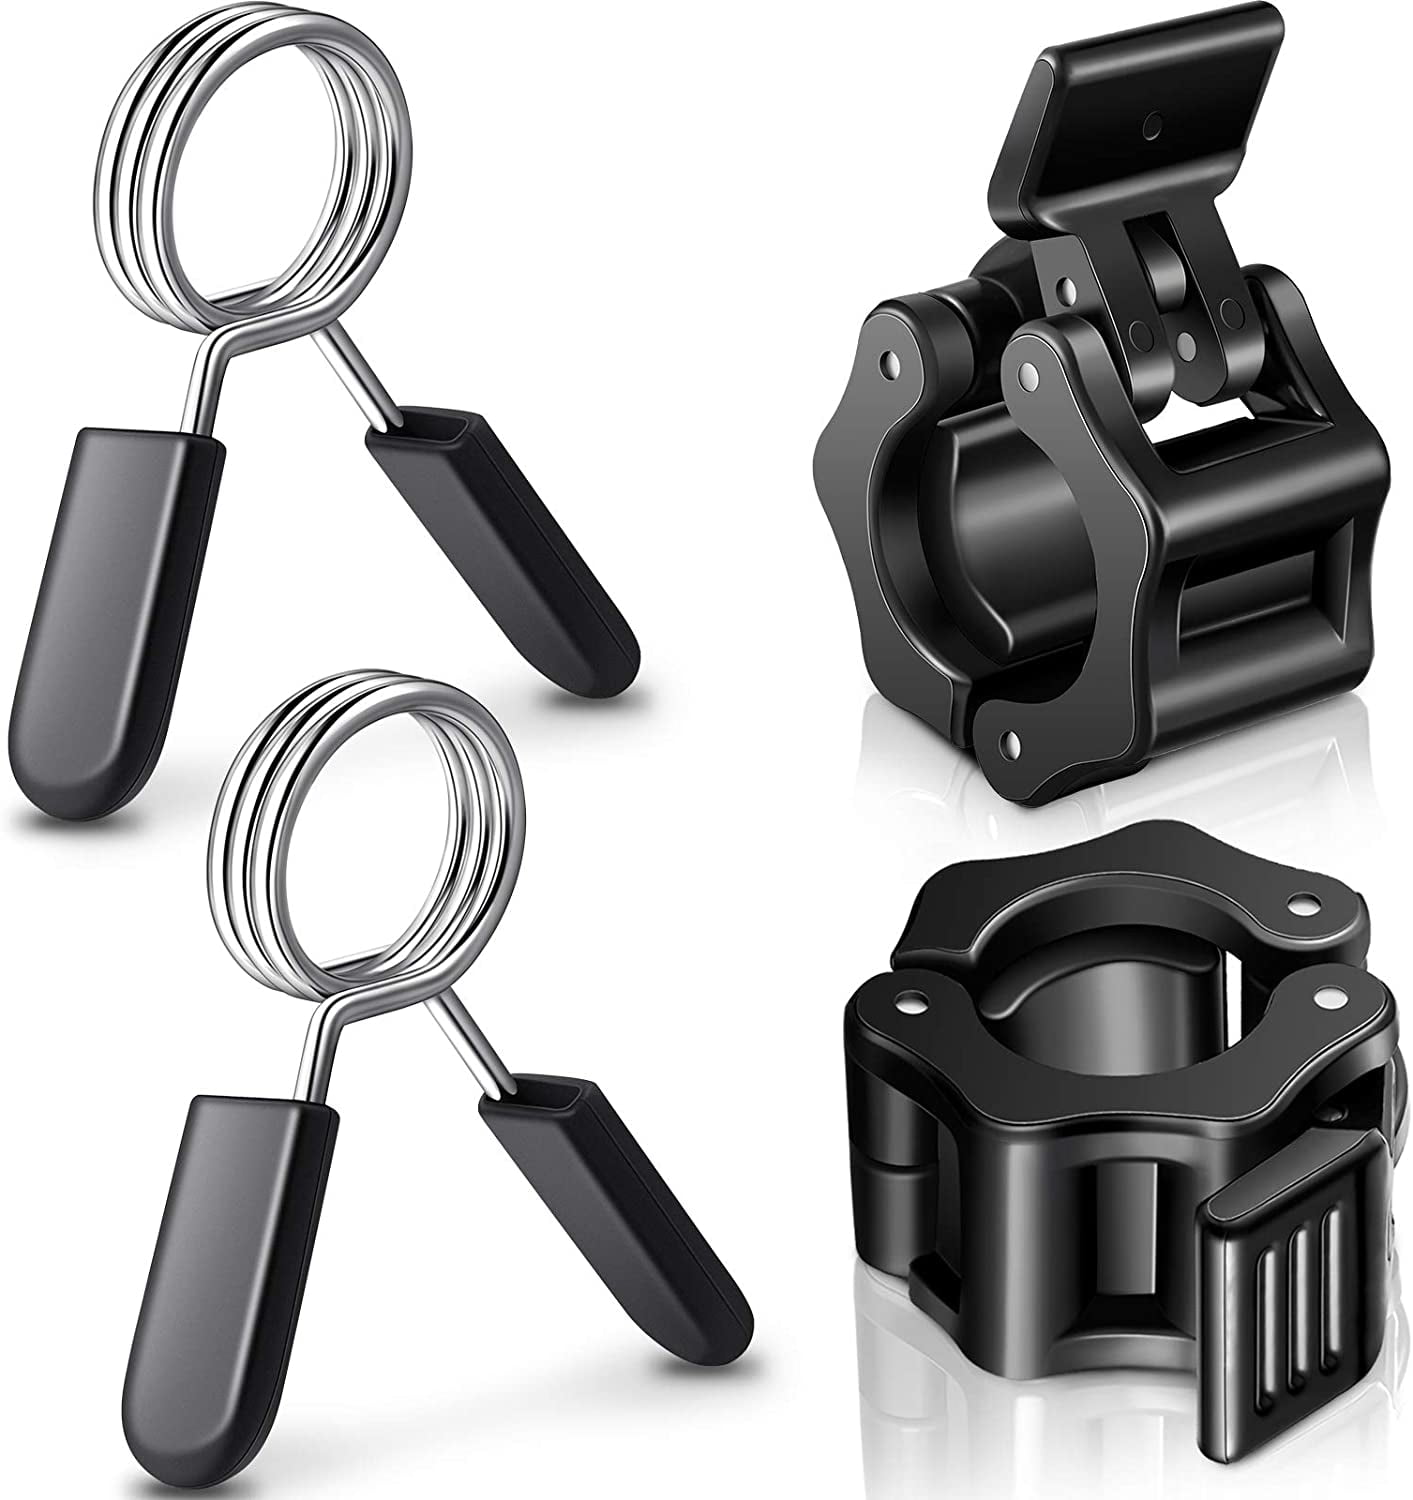 2 Pieces Spring Collar Clips Dumbbell Lock Clips and 2 Pieces Barbell Collars Barbell Clamps for Barbell Gym Equipment Workout Strength Training Weightlifting 1.1 Inch/ 28 mm, Black 